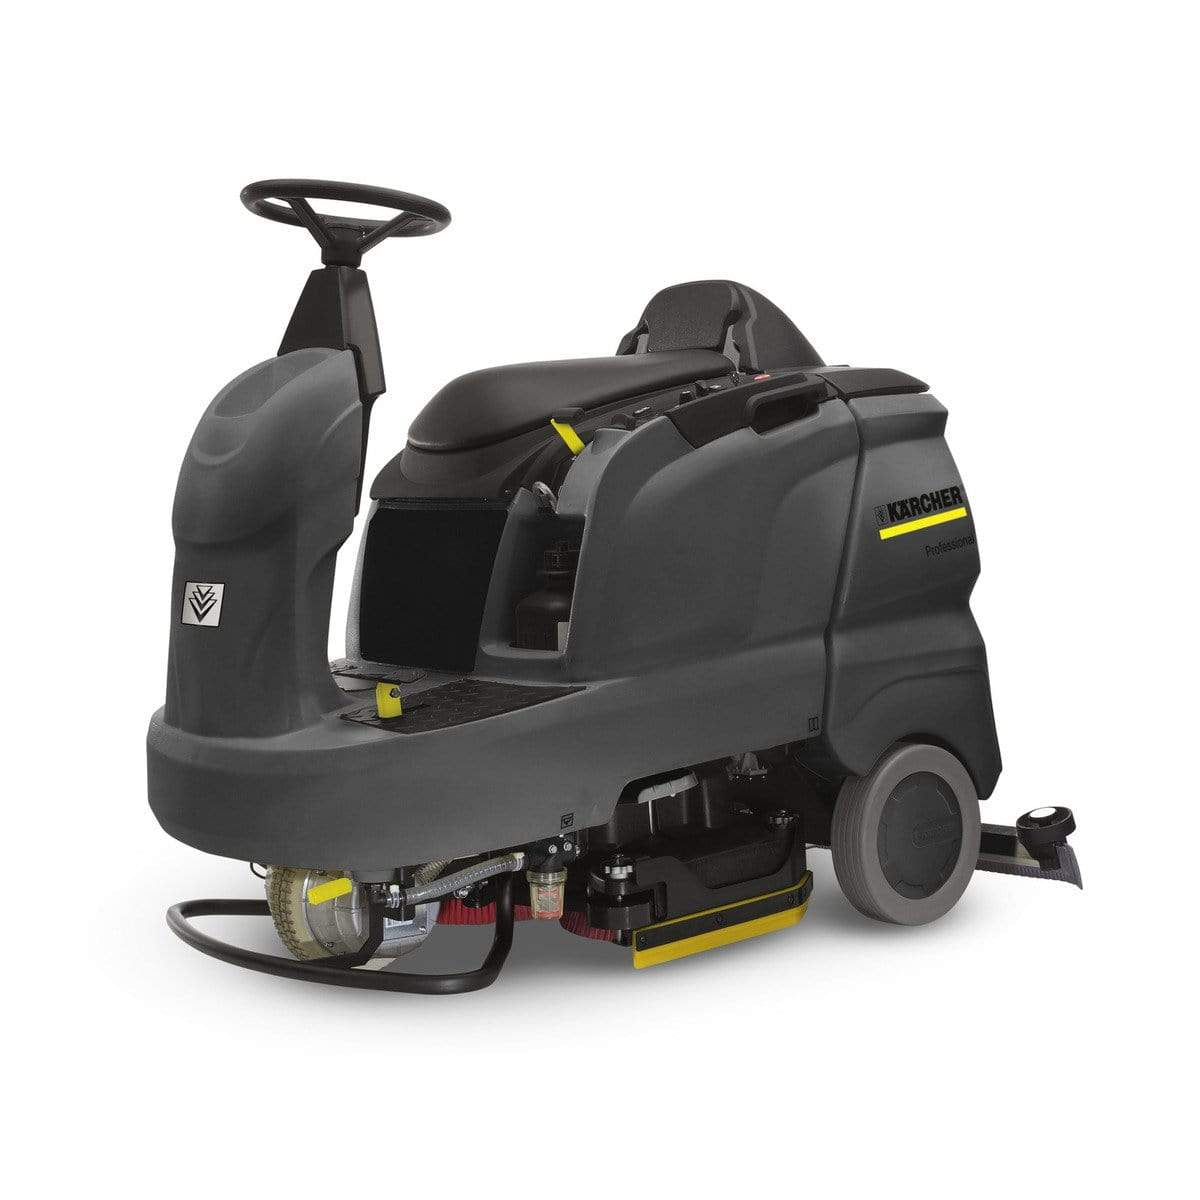 Karcher Ride-on Scrubber Drier - B 90 R Classic Bp Pack | Supply Master | Accra, Ghana Tools Building Steel Engineering Hardware tool